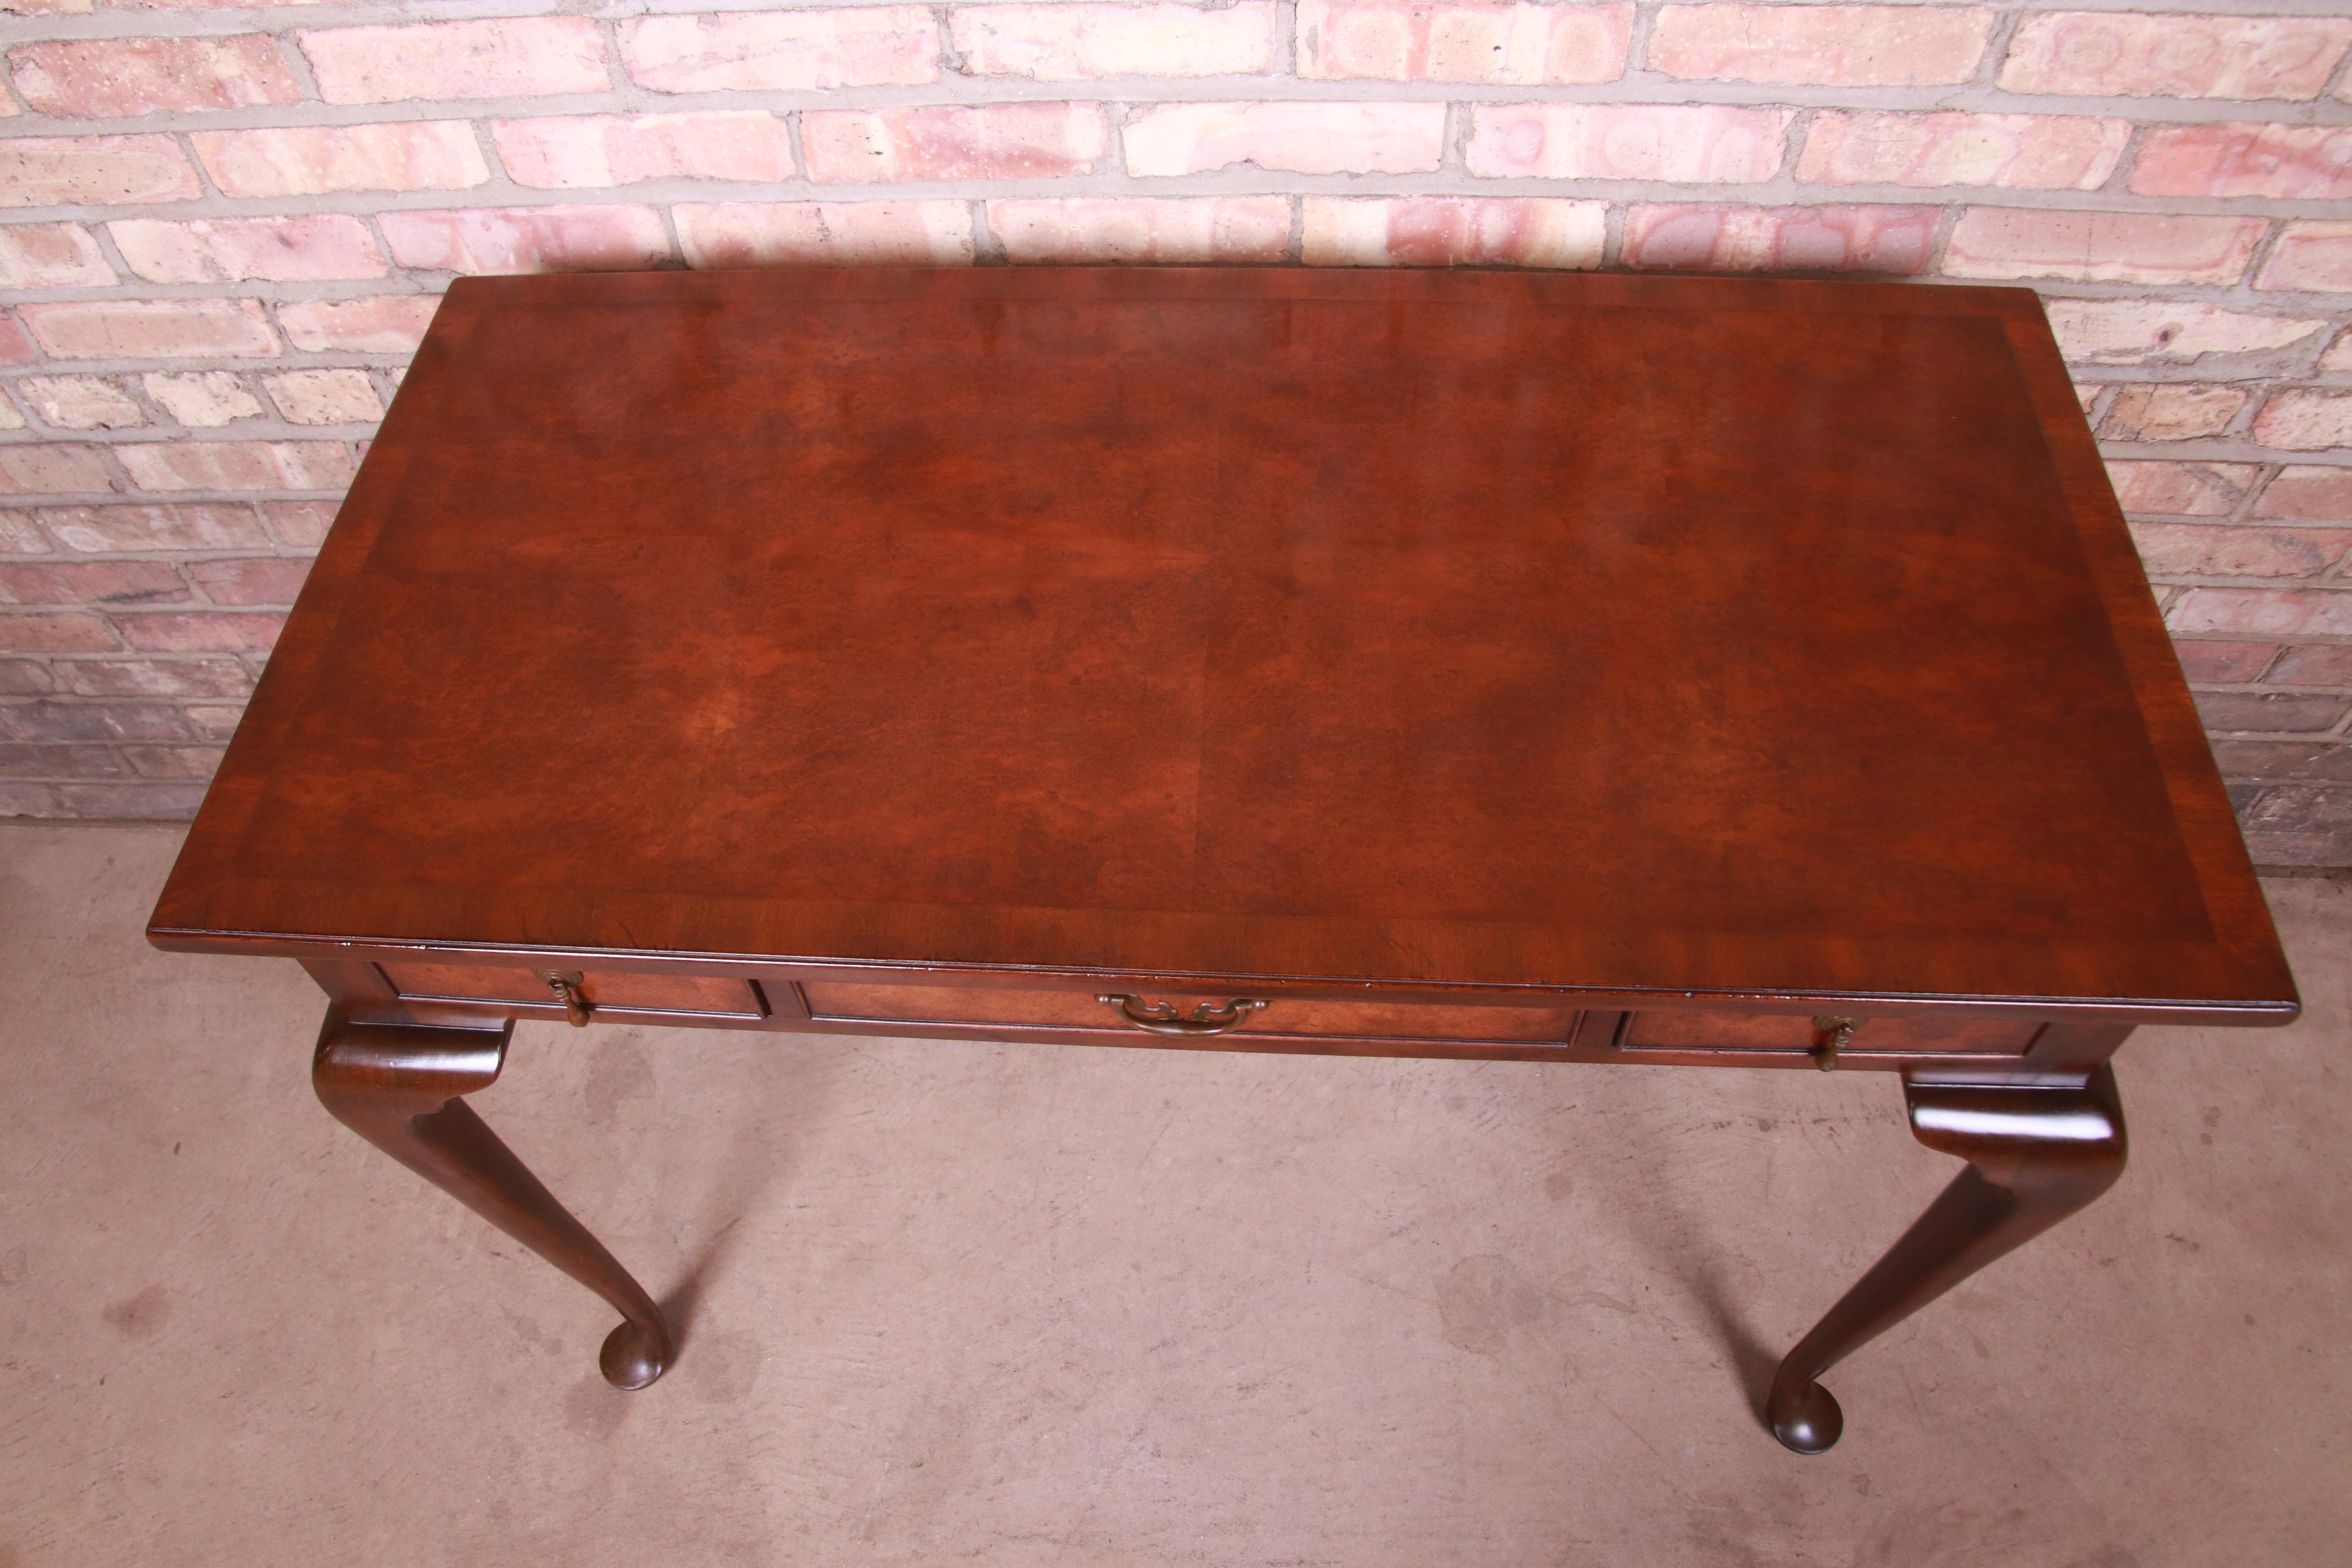 20th Century Kittinger Queen Anne Burled Walnut Writing Desk or Console Table